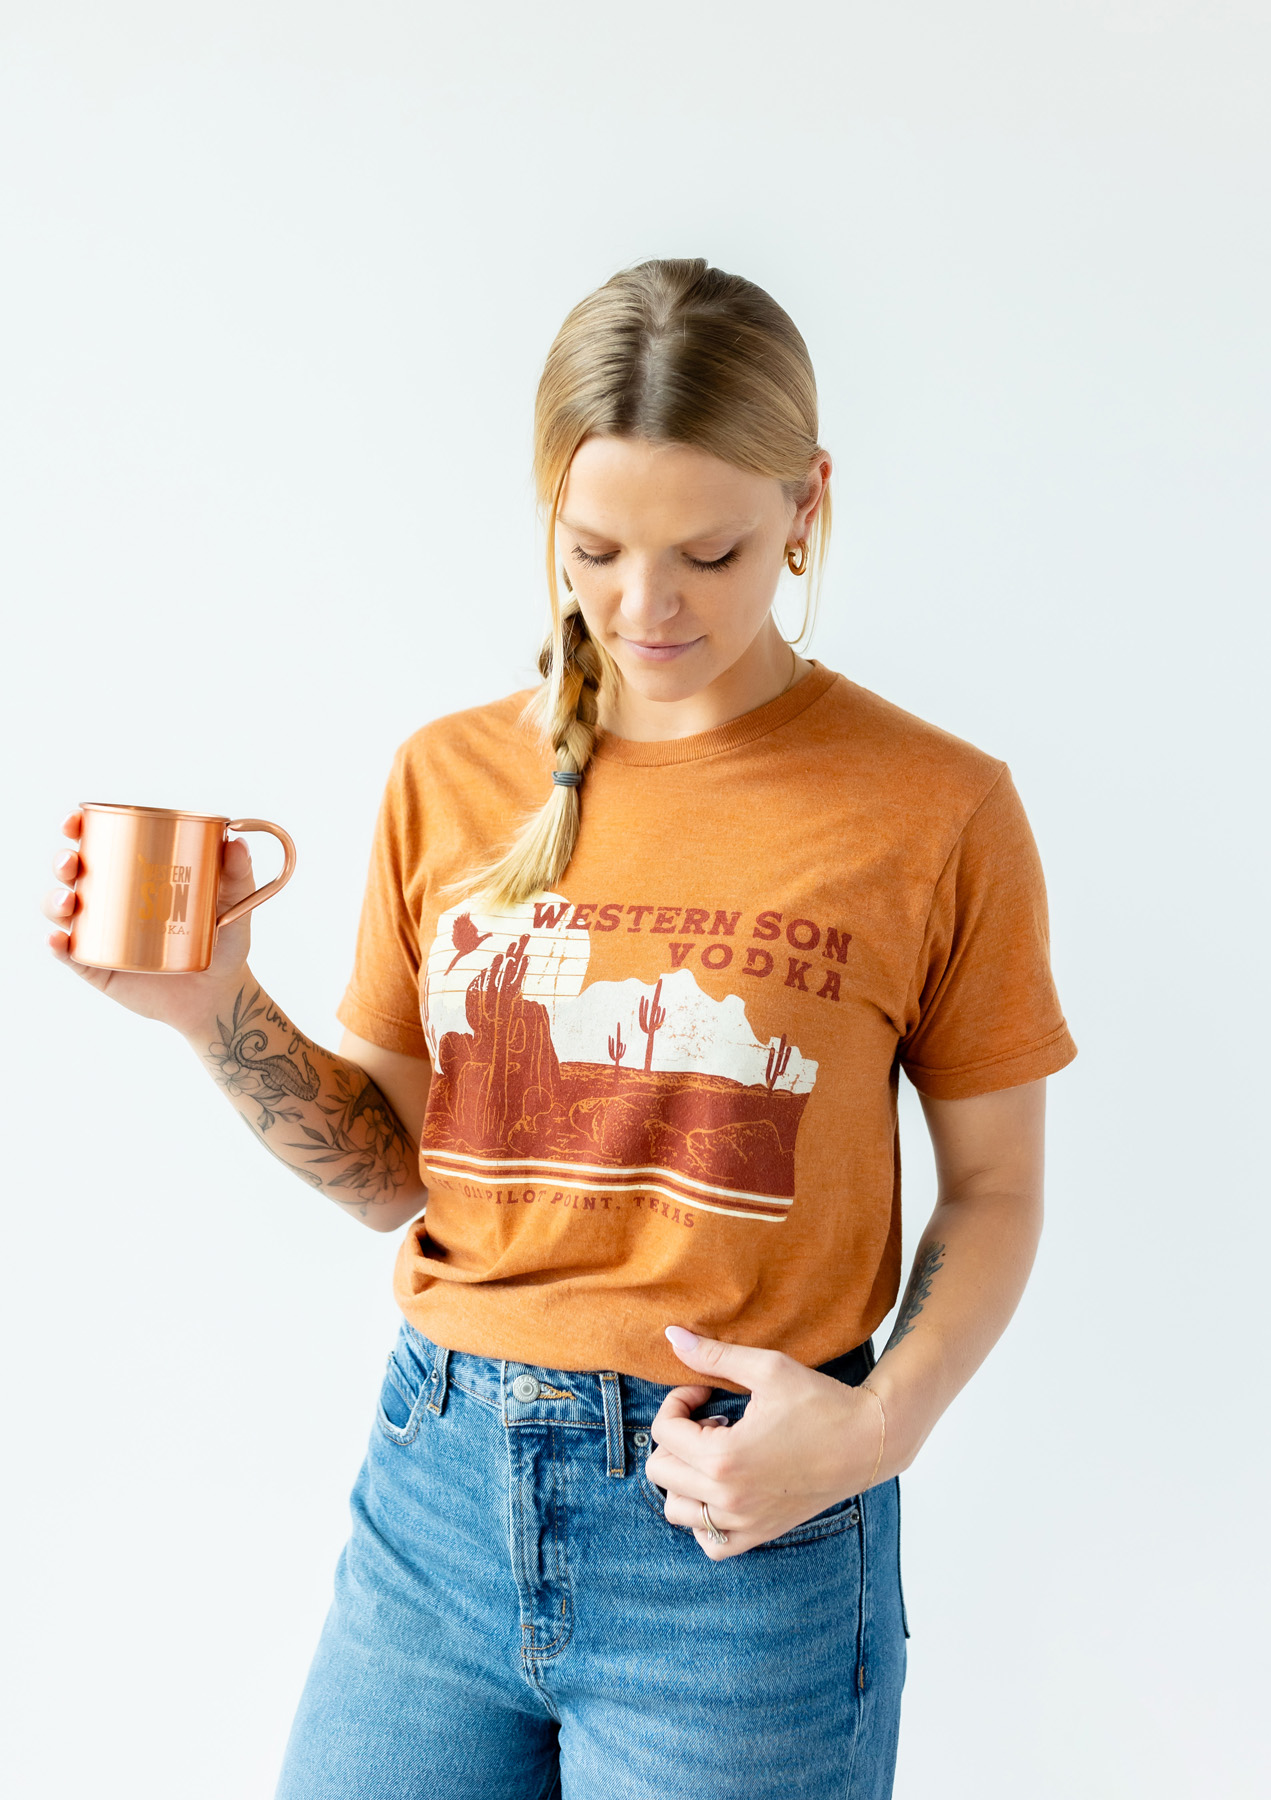 Western Son Vodka Apparel by Dallas Product Photographer